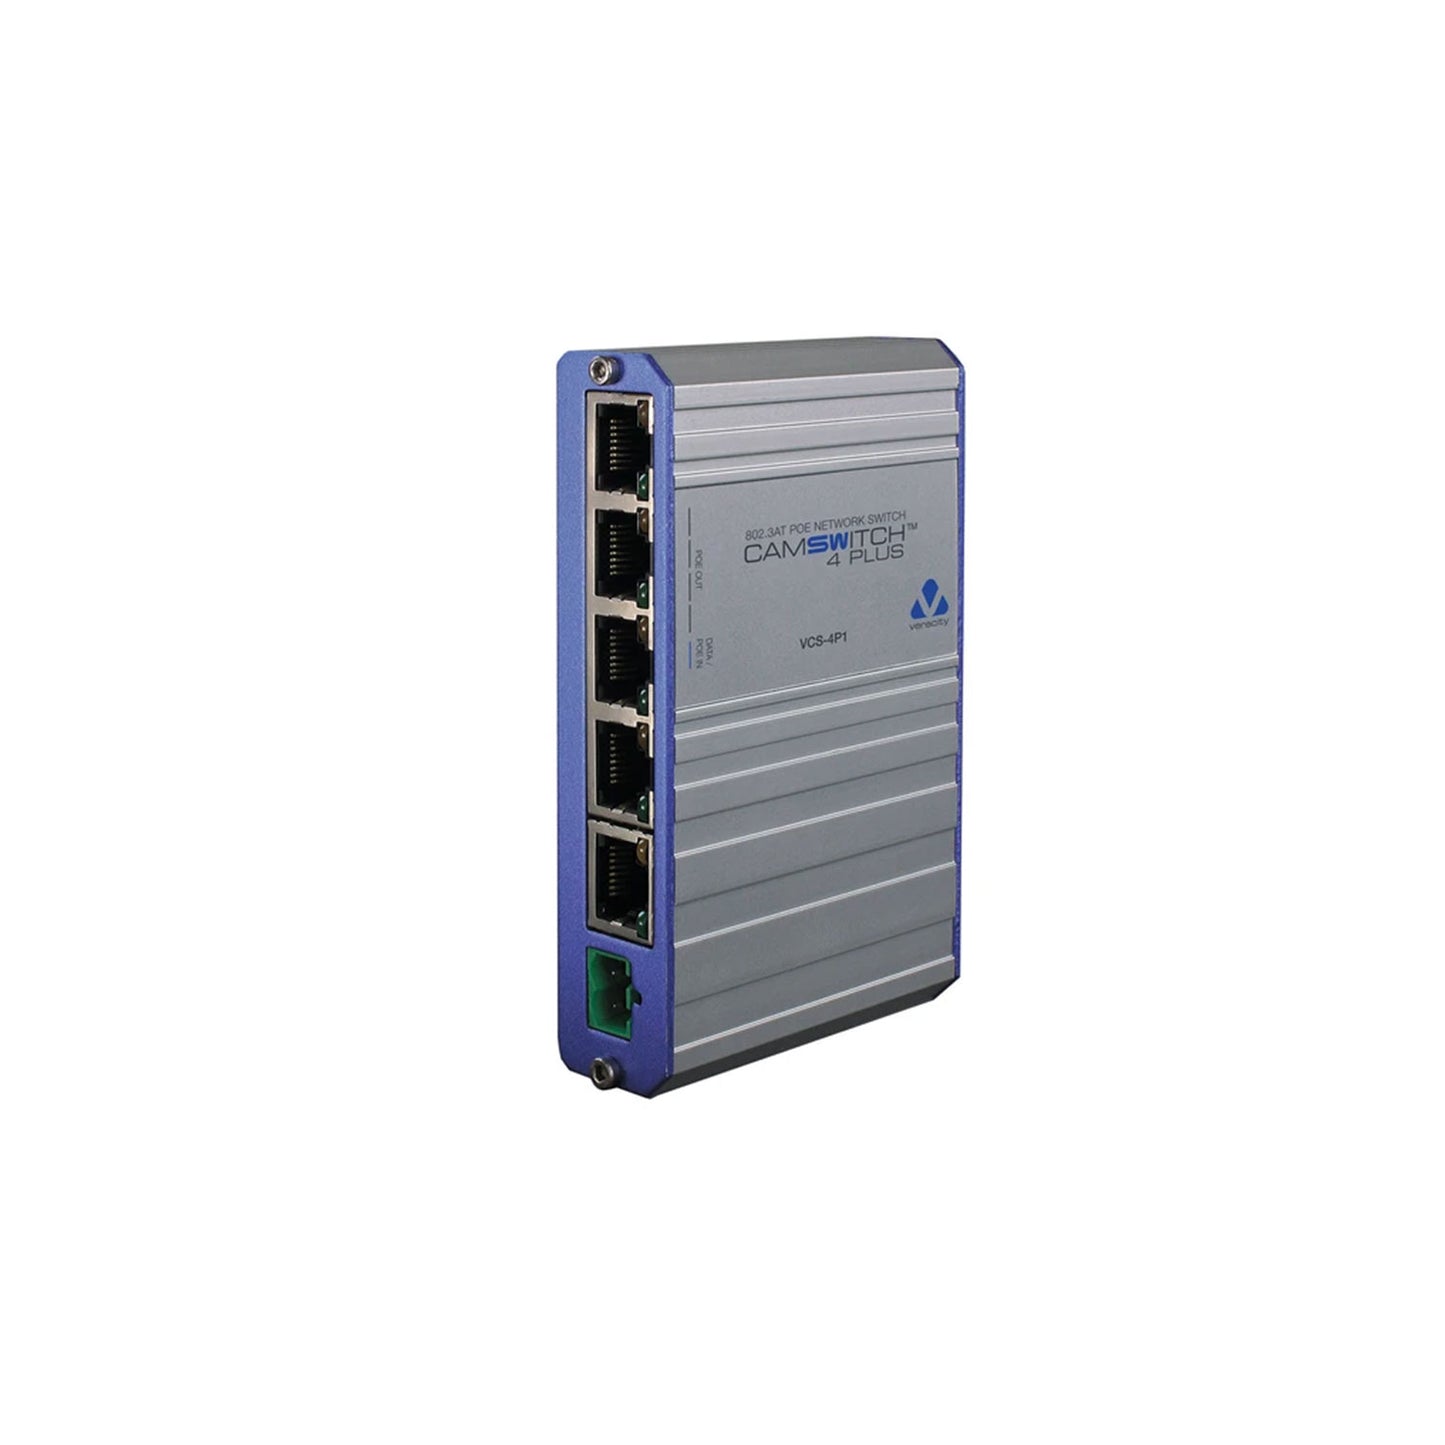 Veracity VCS-4P1 CAMSWITCH 4 Plus POE PLUS NETWORK SWITCH